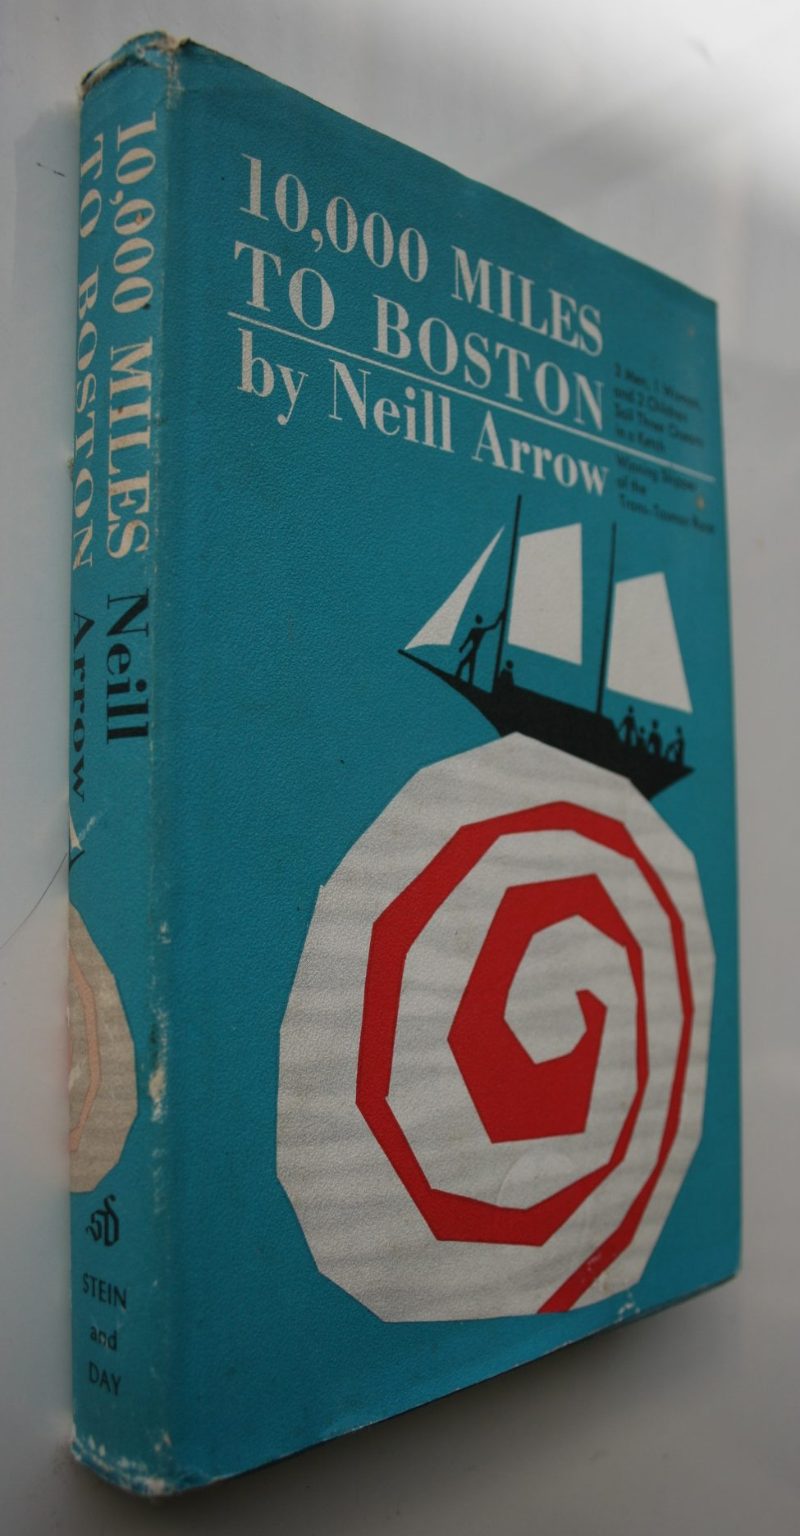 10,000 Miles to Boston. By Neill ARROW. Sailing from New Zealand to Boston